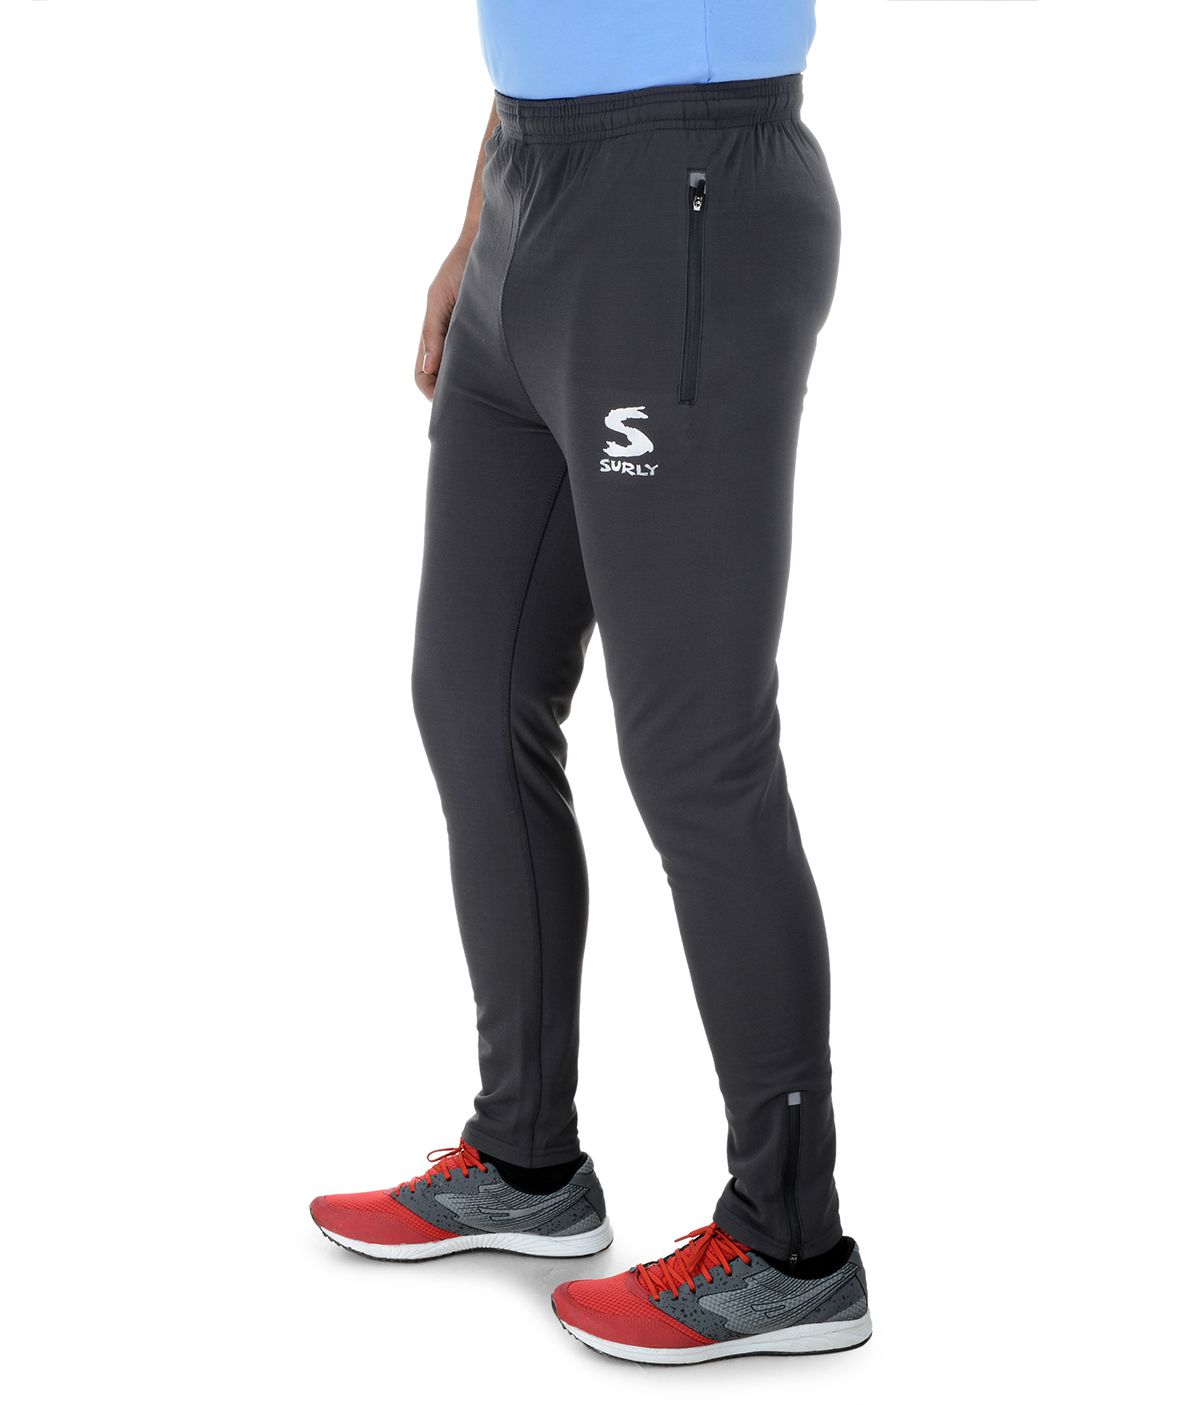 Surly Black Trackpants - Buy Surly Black Trackpants Online at Low Price ...